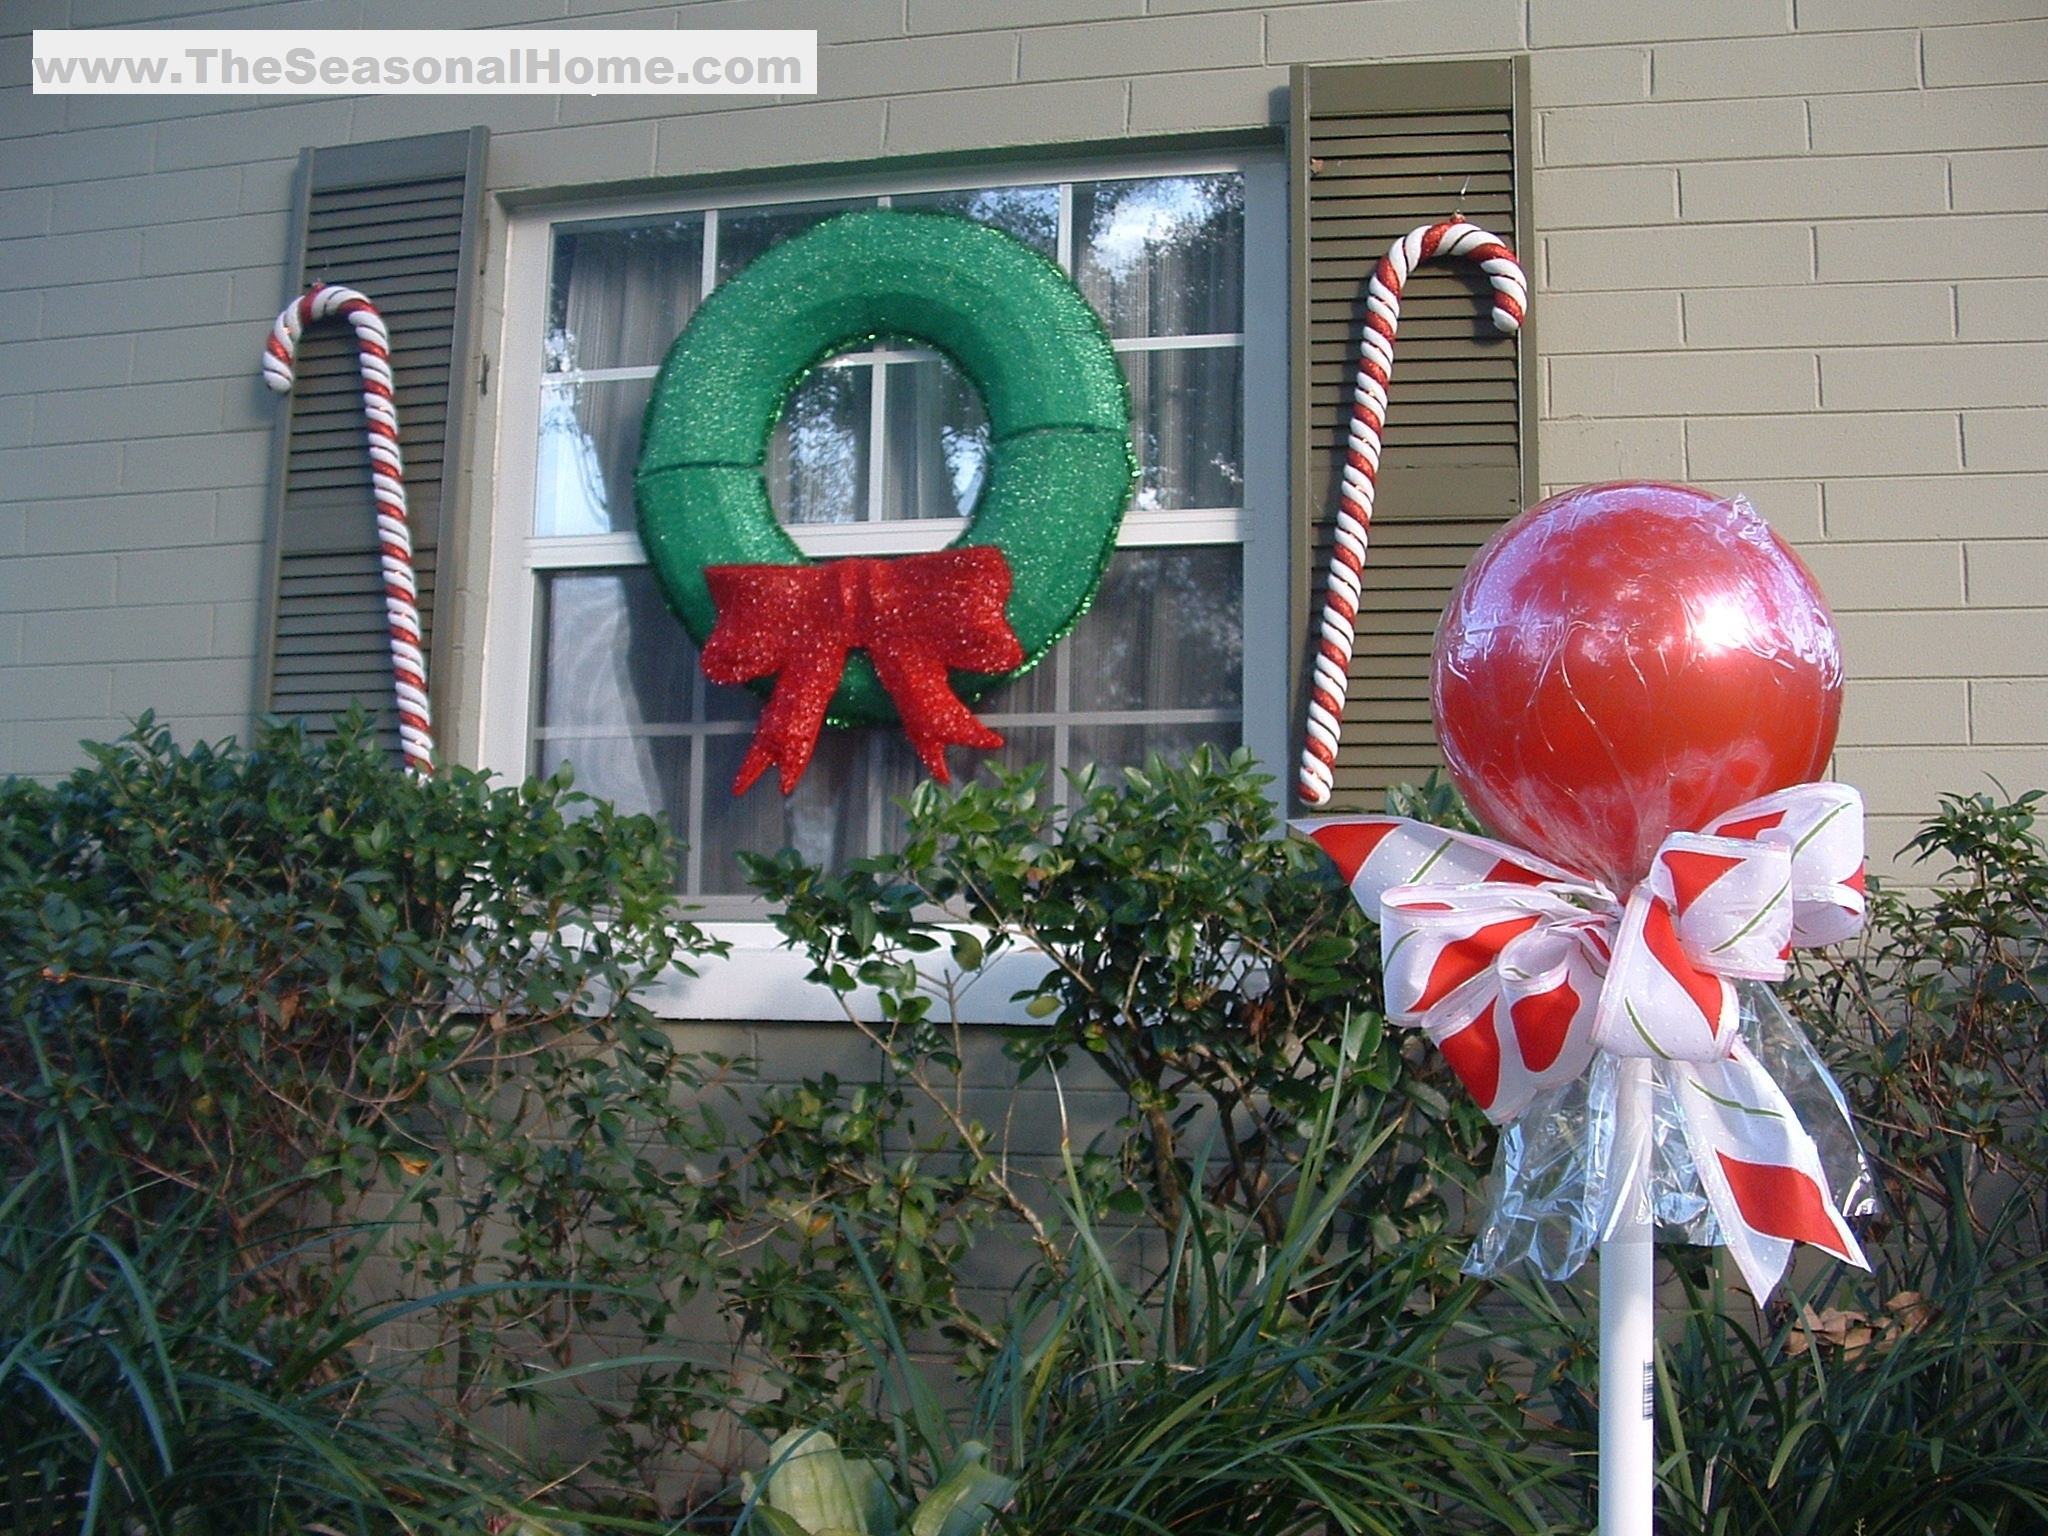 DIY Outdoor Christmas Candy Decorations
 Outdoor “CANDY” A Christmas Decorating Idea The